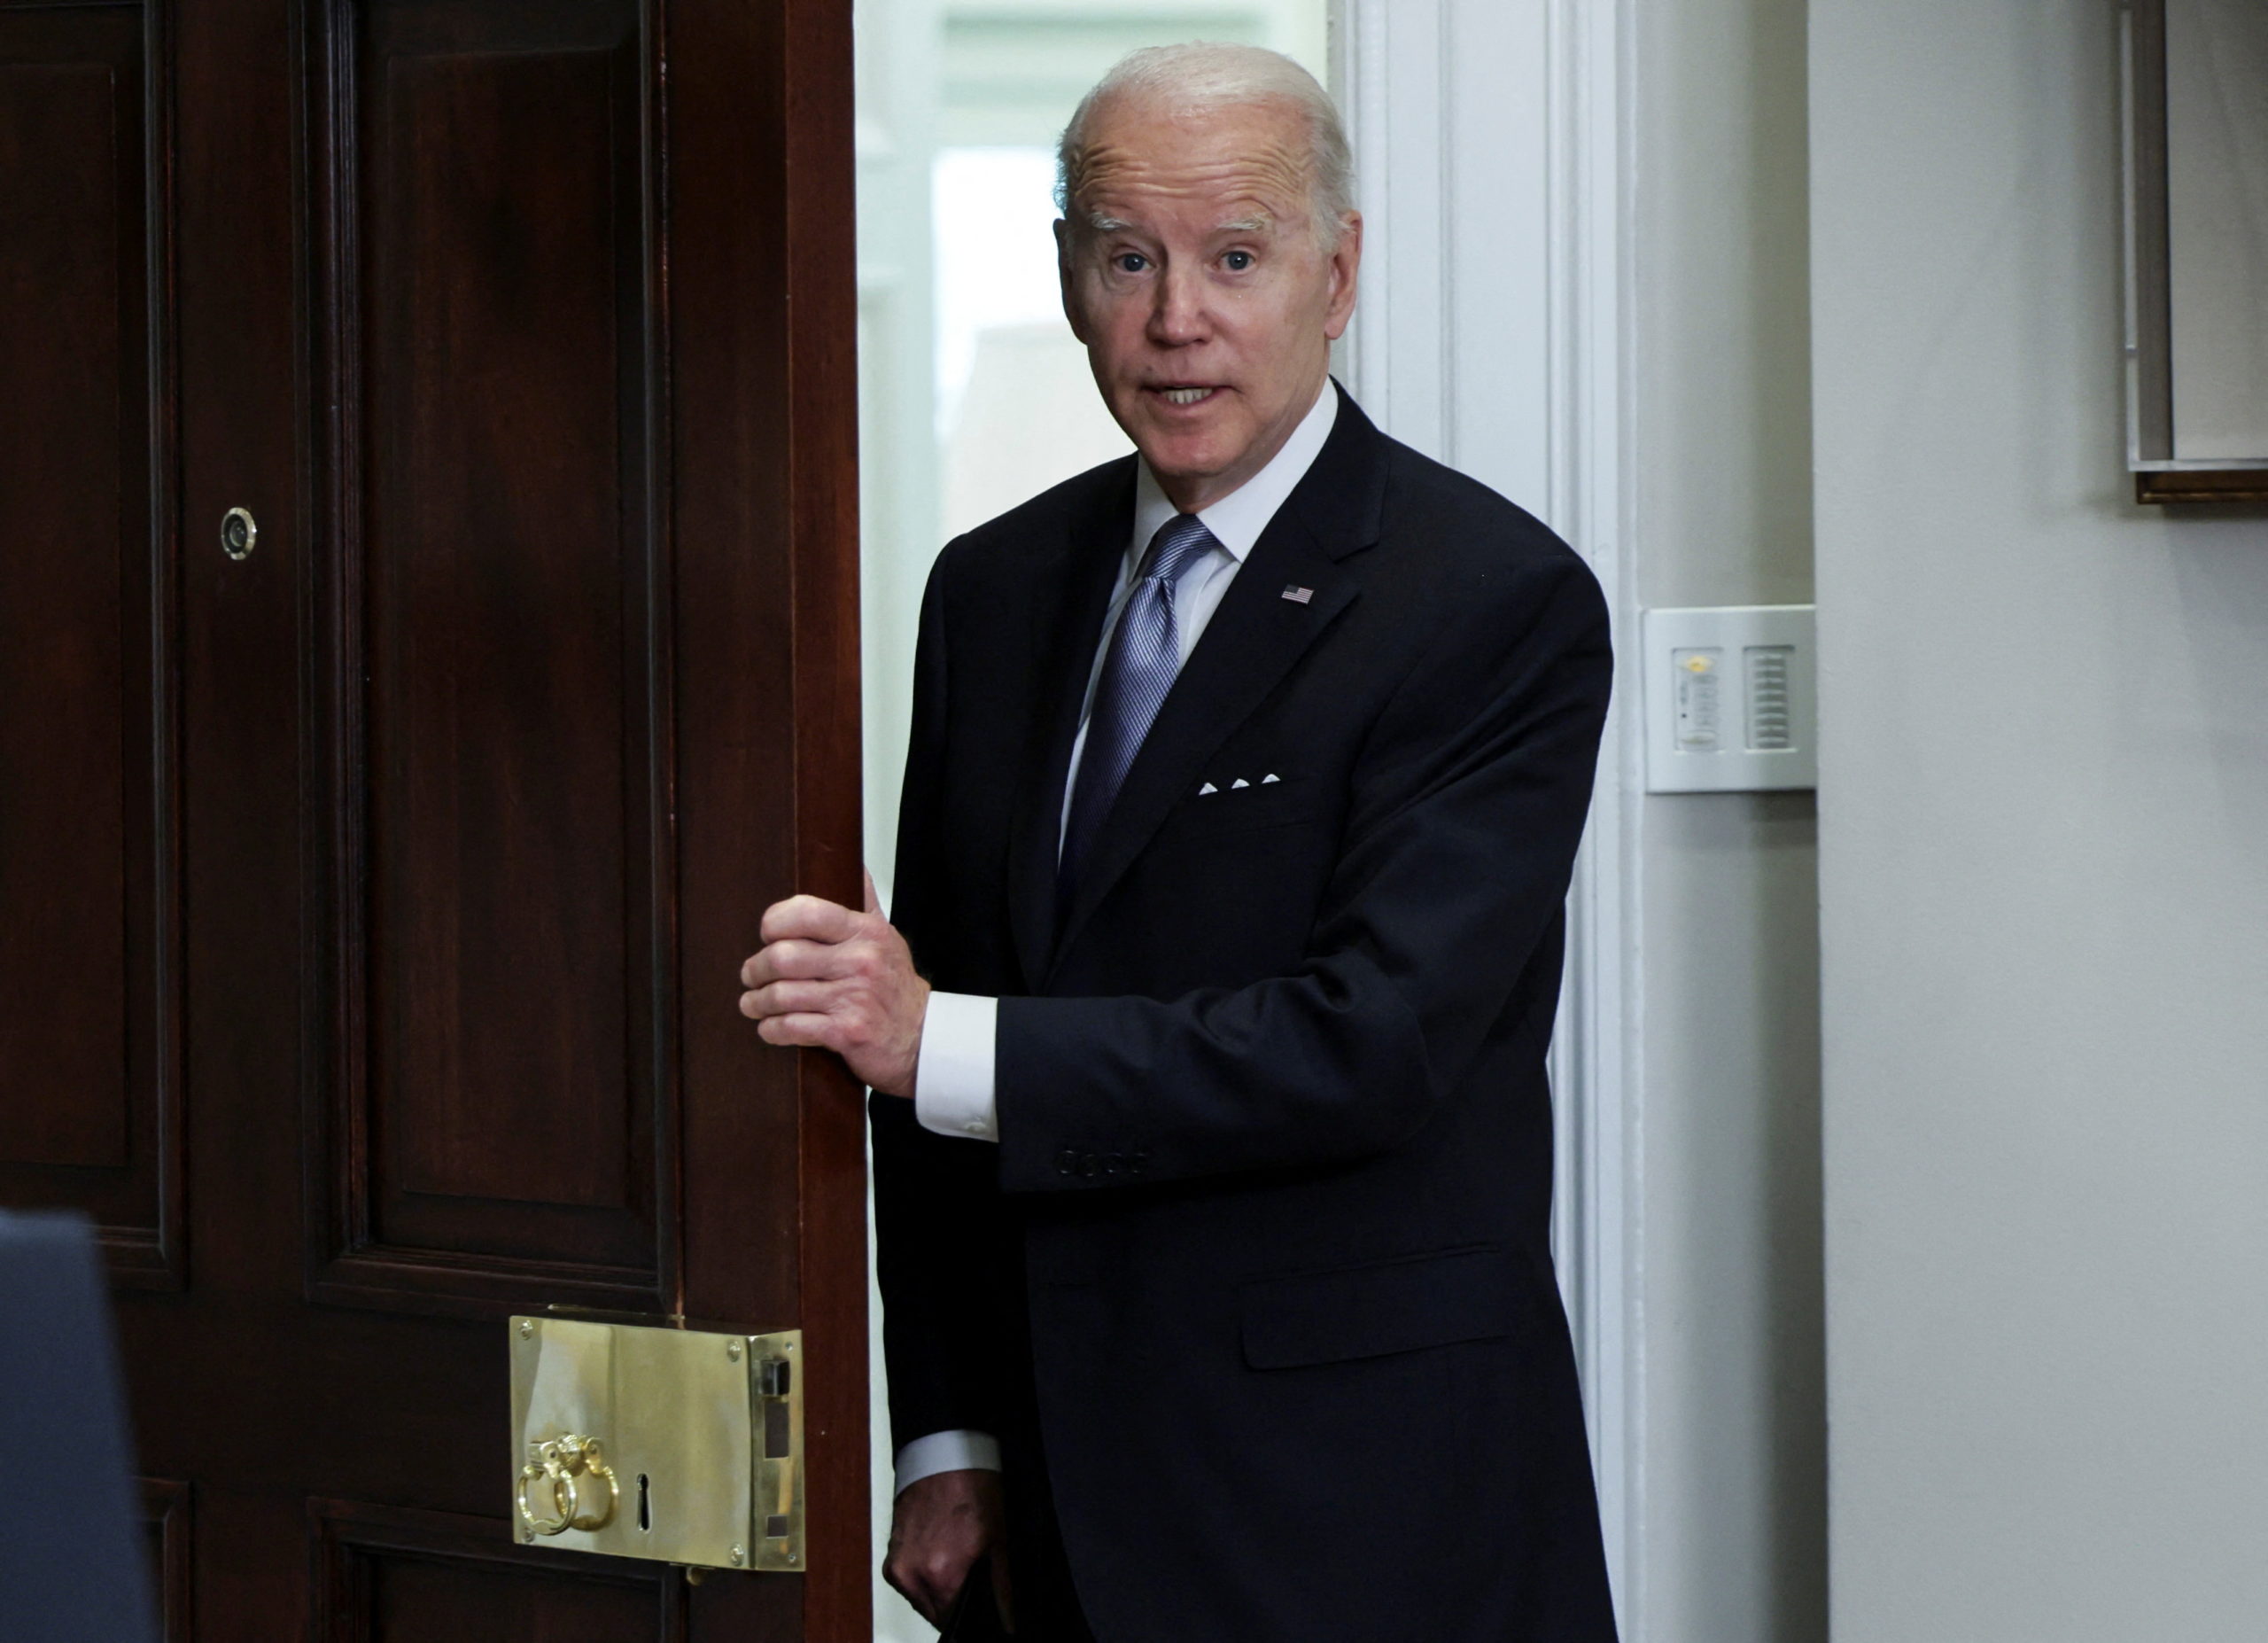 U.S. President Joe Biden responds to questions while departing the Roosevelt Room after announcing an additional $800 million security assistance package for Ukraine amid Russia's invasion, at the White House in Washington, U.S., April 21, 2022. REUTERS/Evelyn Hockstein